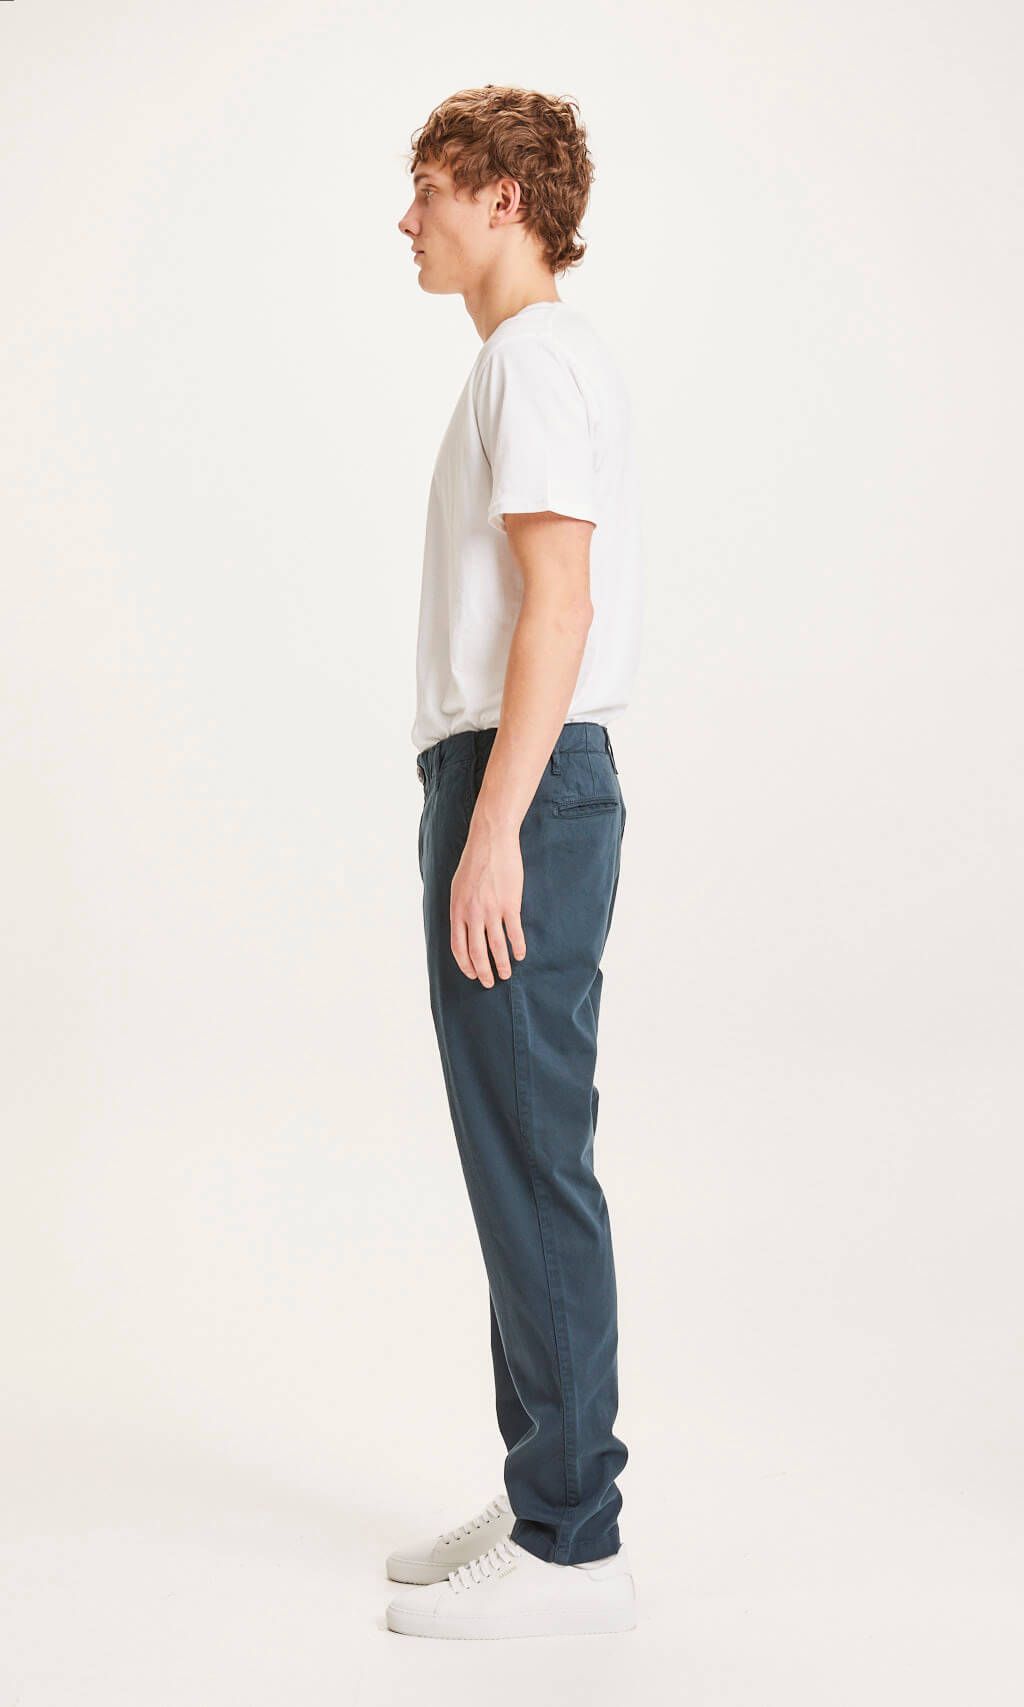 Chuck Regular Stretched Chino Pant Total Eclipse 31/32